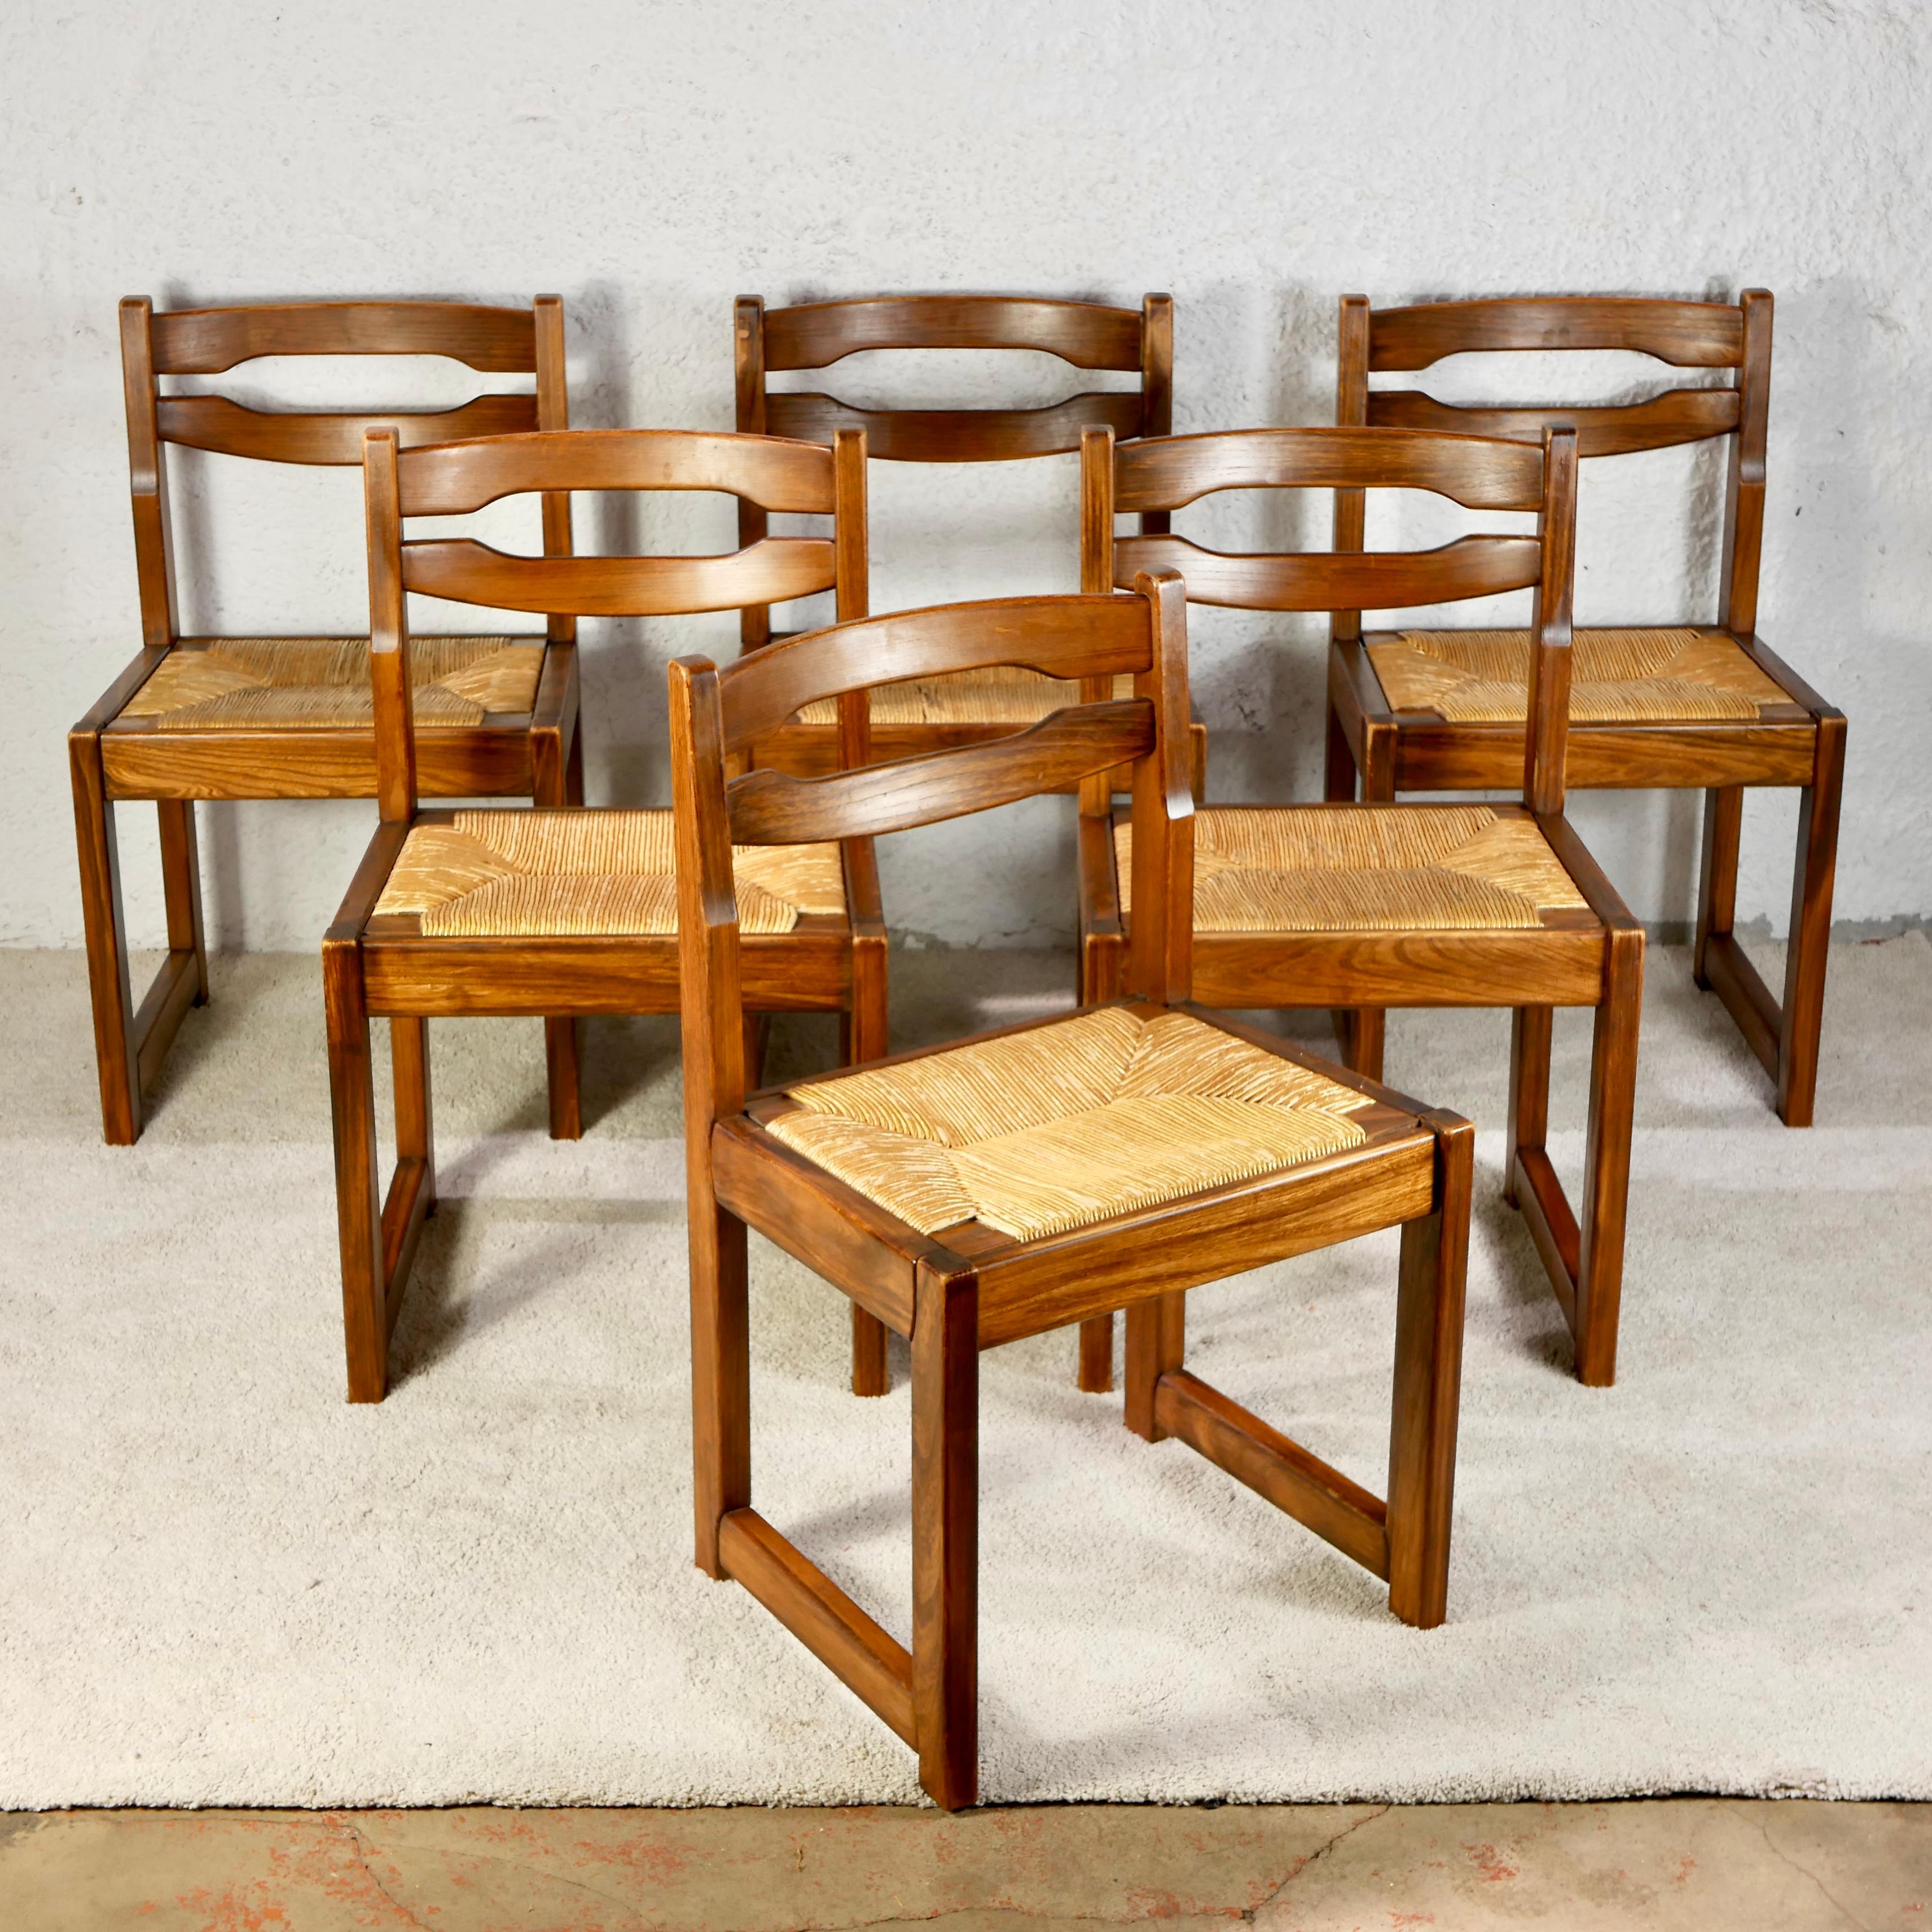 Beautiful set of 6 sturdy chairs by Maison Regain, made in the end of the 1970s-beginning of the 1980s in France.
Nice brutalist style with beautiful making details, solid elm wood with beautiful grain and rope.
Wood structure in good condition,